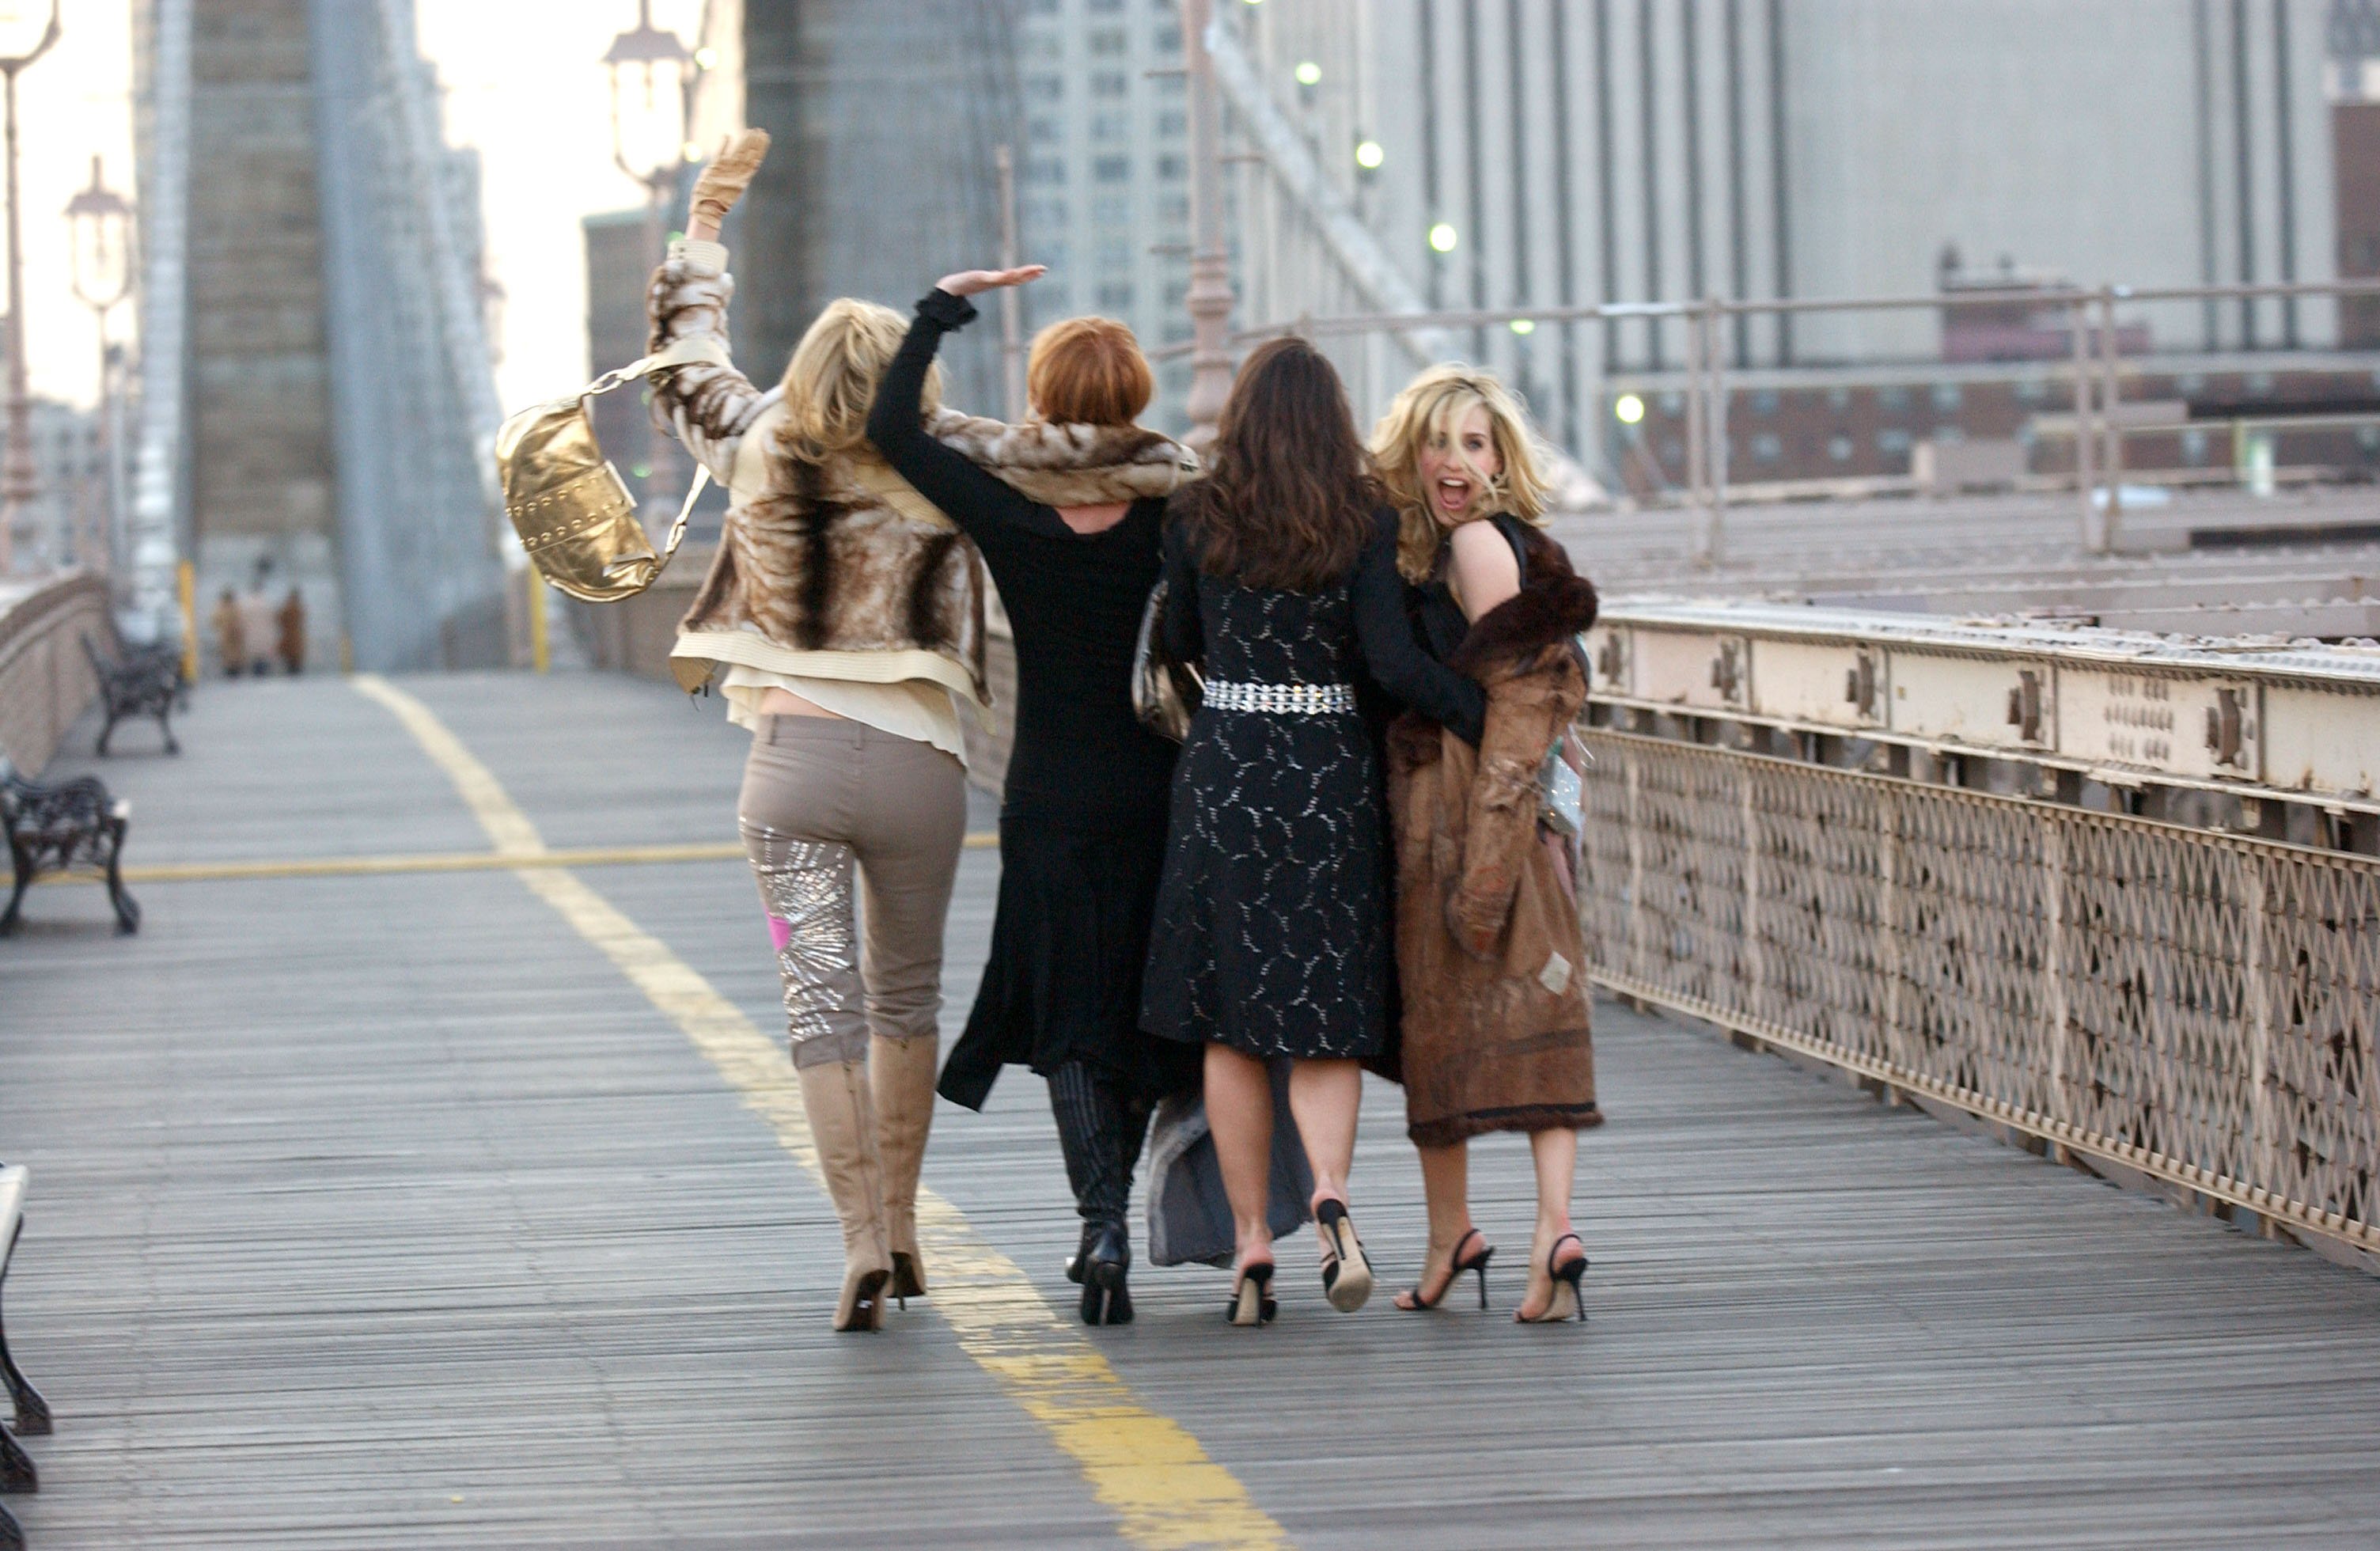 Kim Cattrall, Cynthia Nixon, Kristin Davis and Sarah Jessica Parker are photographed from behind walking across the Brooklyn Bridge during a promotional shoot for 'Sex and the City: The Movie'